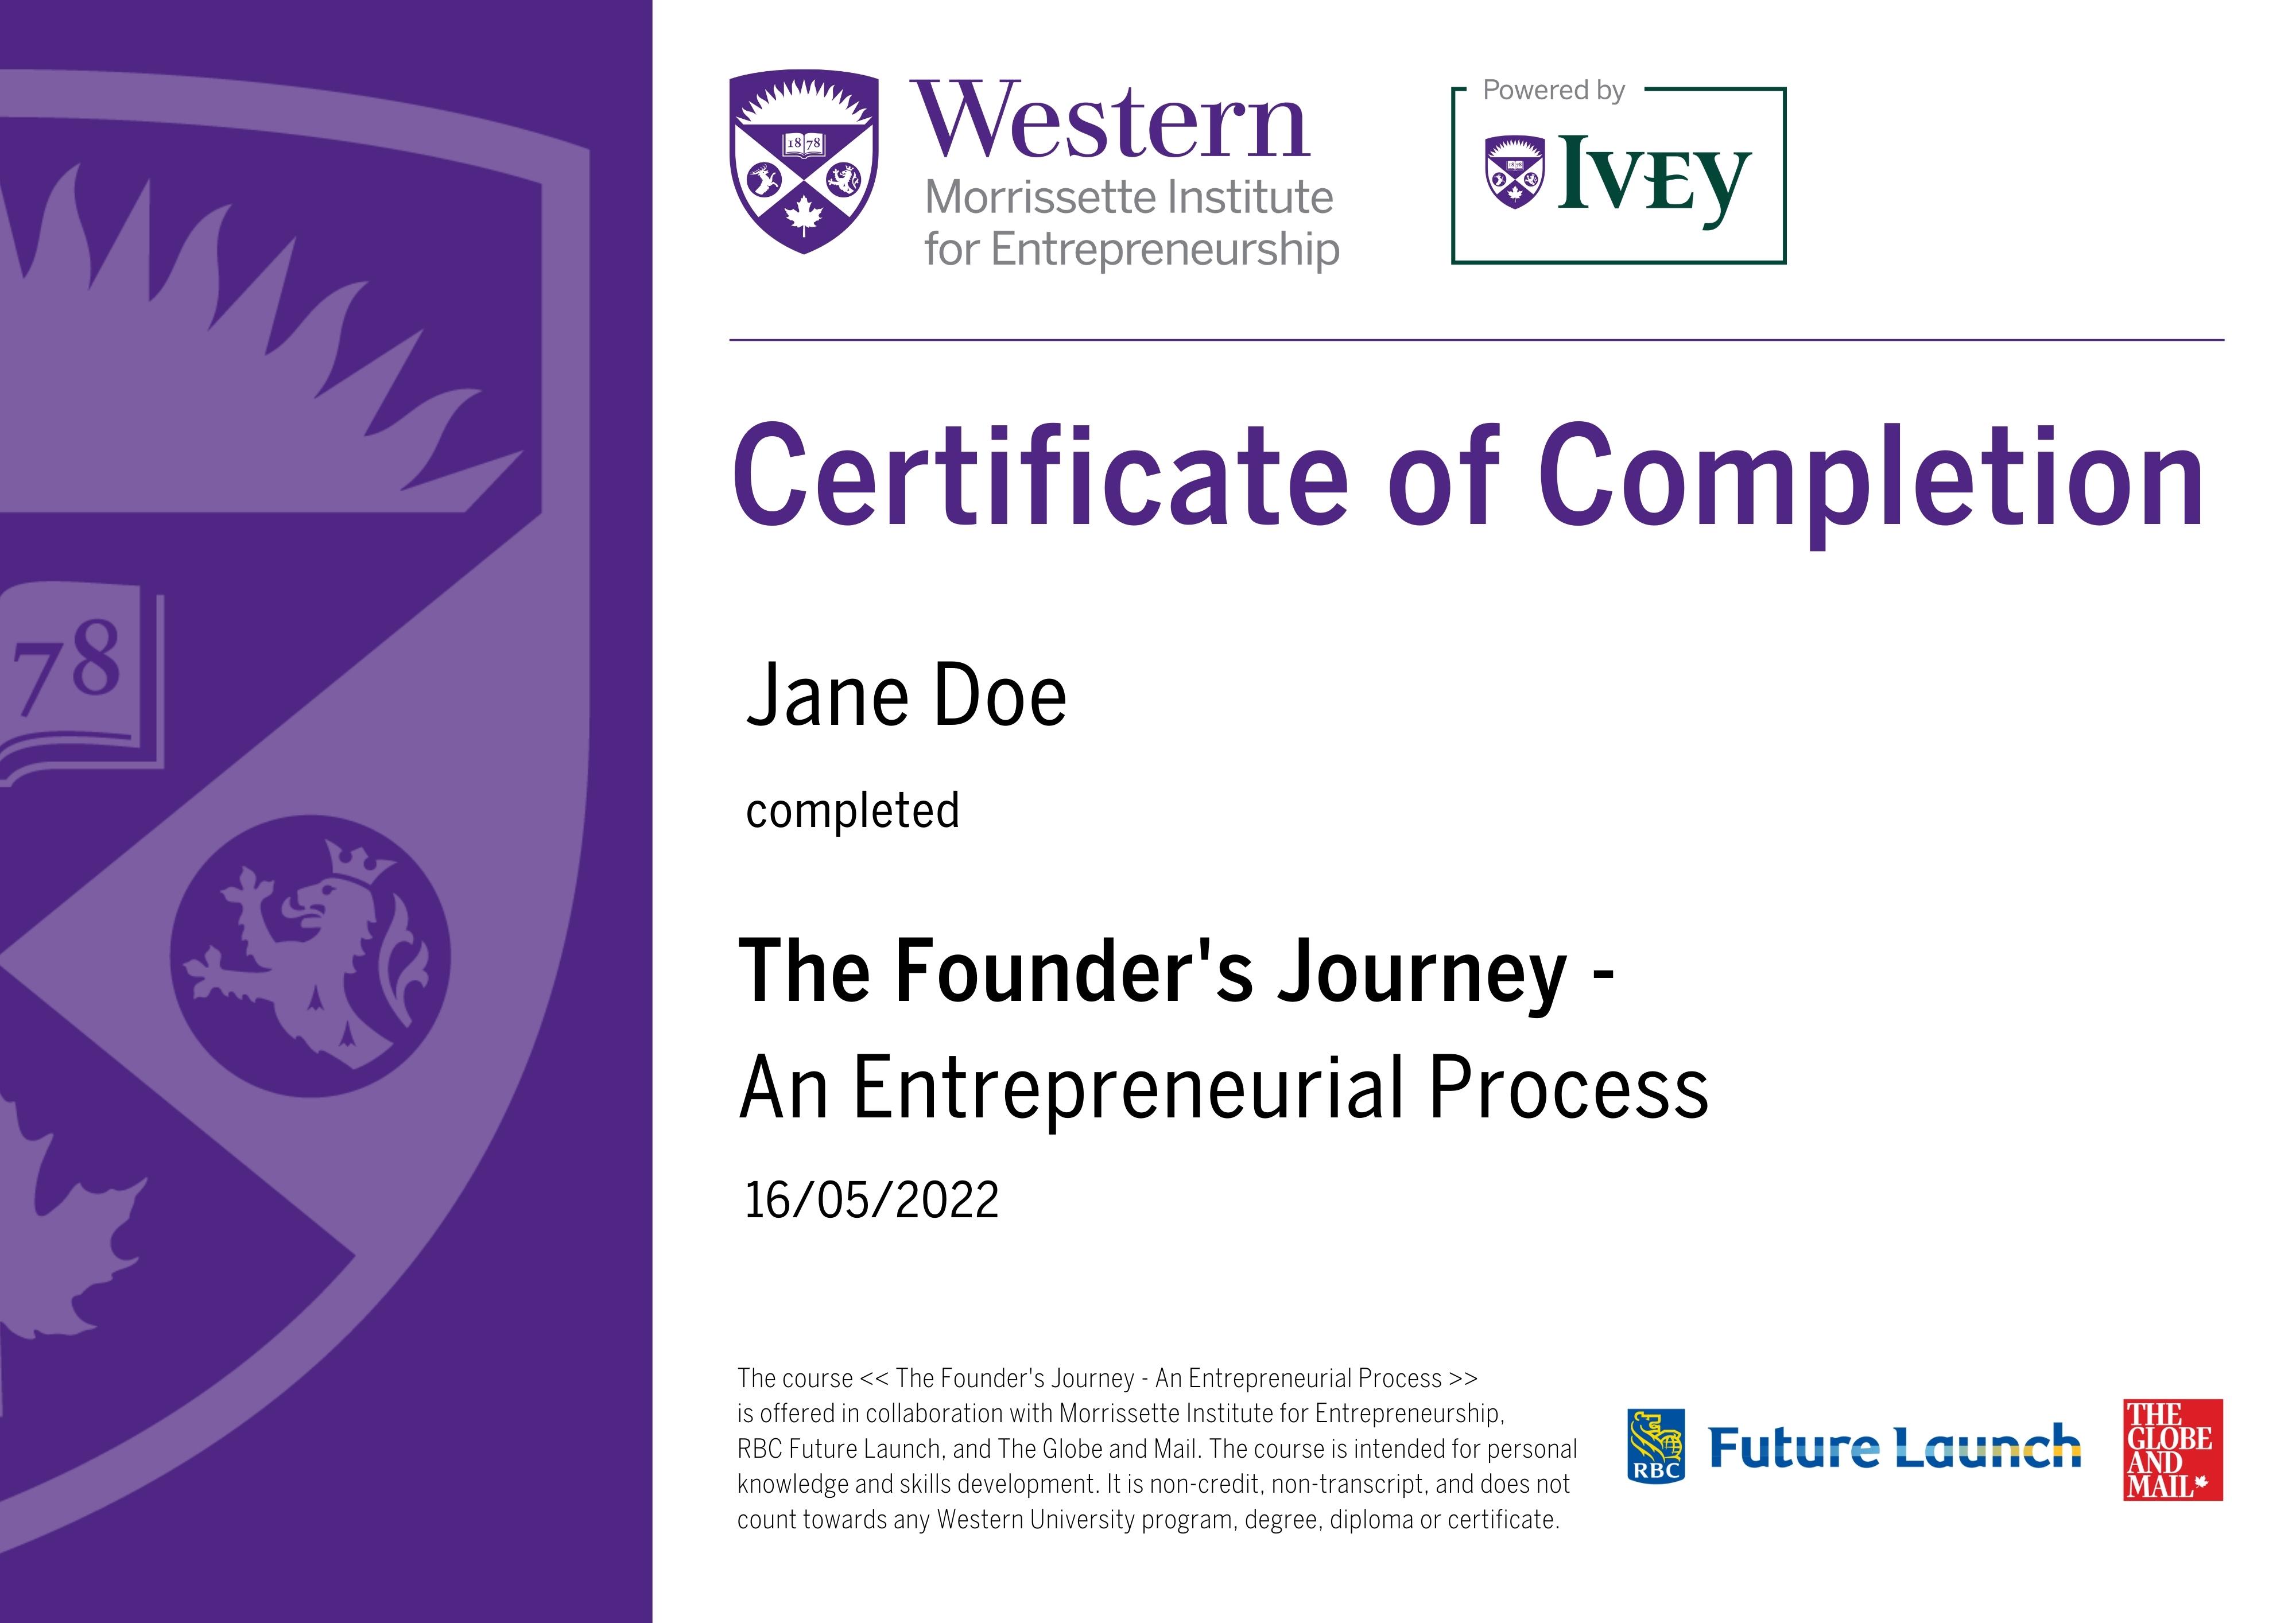 Western Morrissette Institute For Entrepreneurship, Powered by Ivey. Certificate of Completion for The Founder's Journey - An Entrepreneurial Process. Your name and date of completion. The course The Founder's Journey - An Entrepreneurial Process is offered in collaboration with Morrissette Institute for Entrepreneurship. RBC Future Launch, and The Globe and Mail. The course is intended for personal knowledge and skills development. It is non-credit, non-transcript, and does not count towards any Western University program, degree, diploma or certificate. RBC Future Launch, The Globe And Mail.